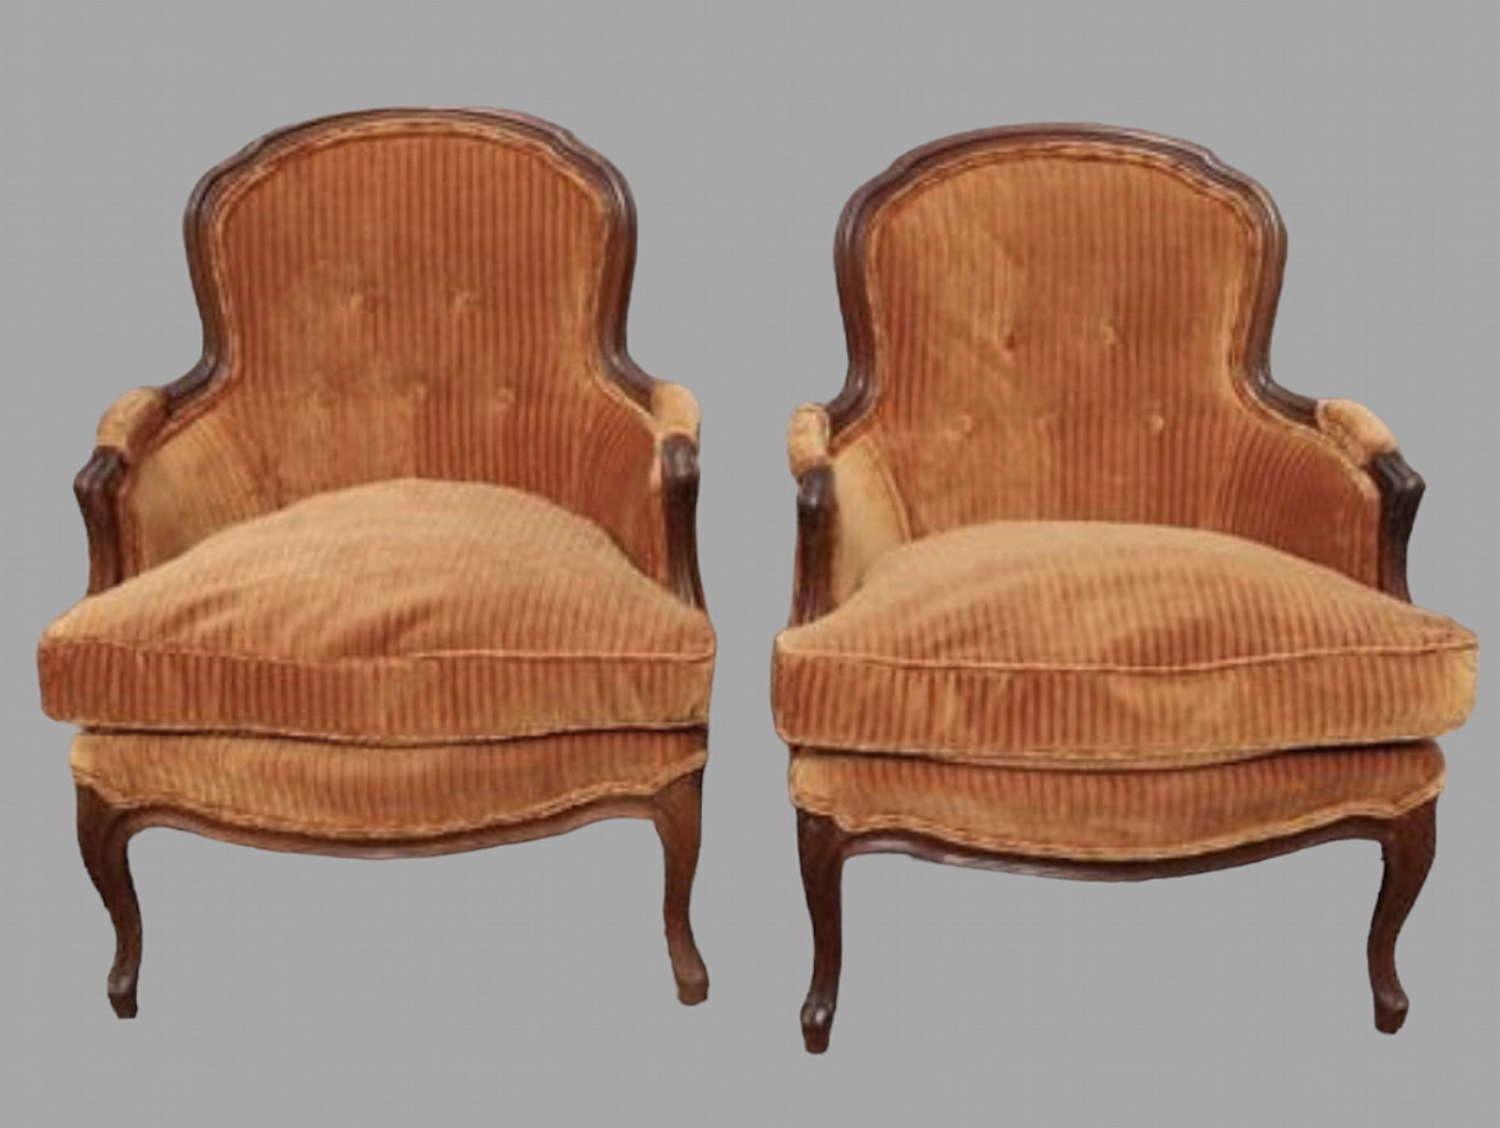 Pair of French Walnut Framed Small Fauteuils